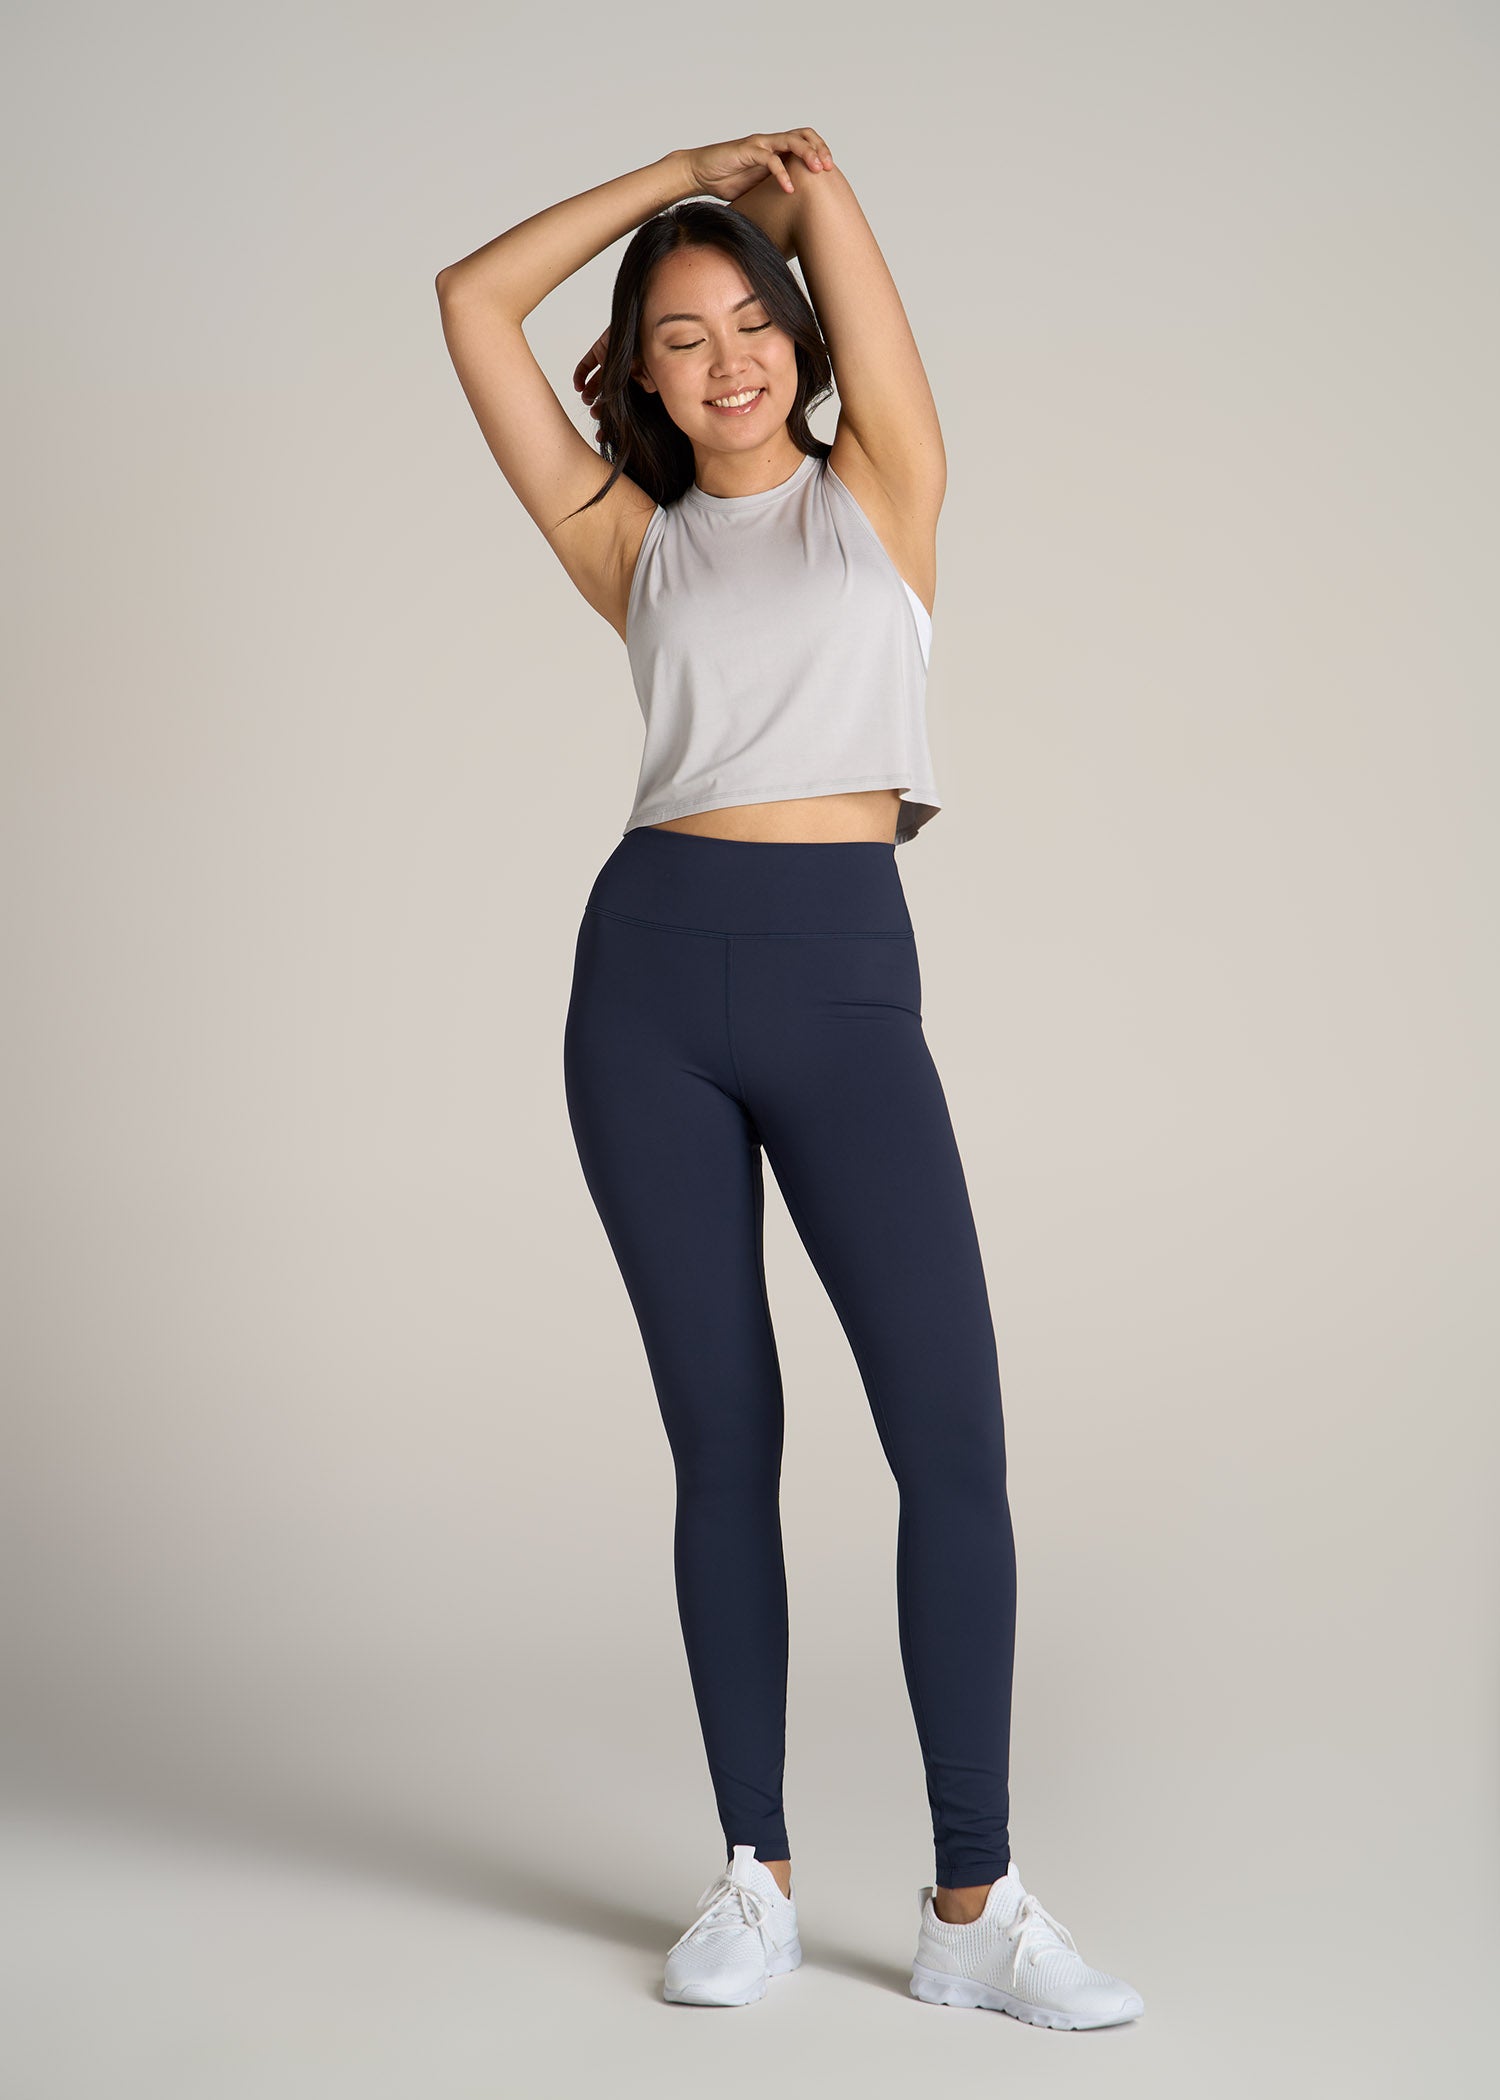 Cheeky Ankle length Yoga Pants with Pocket S-XL- 6 Colors